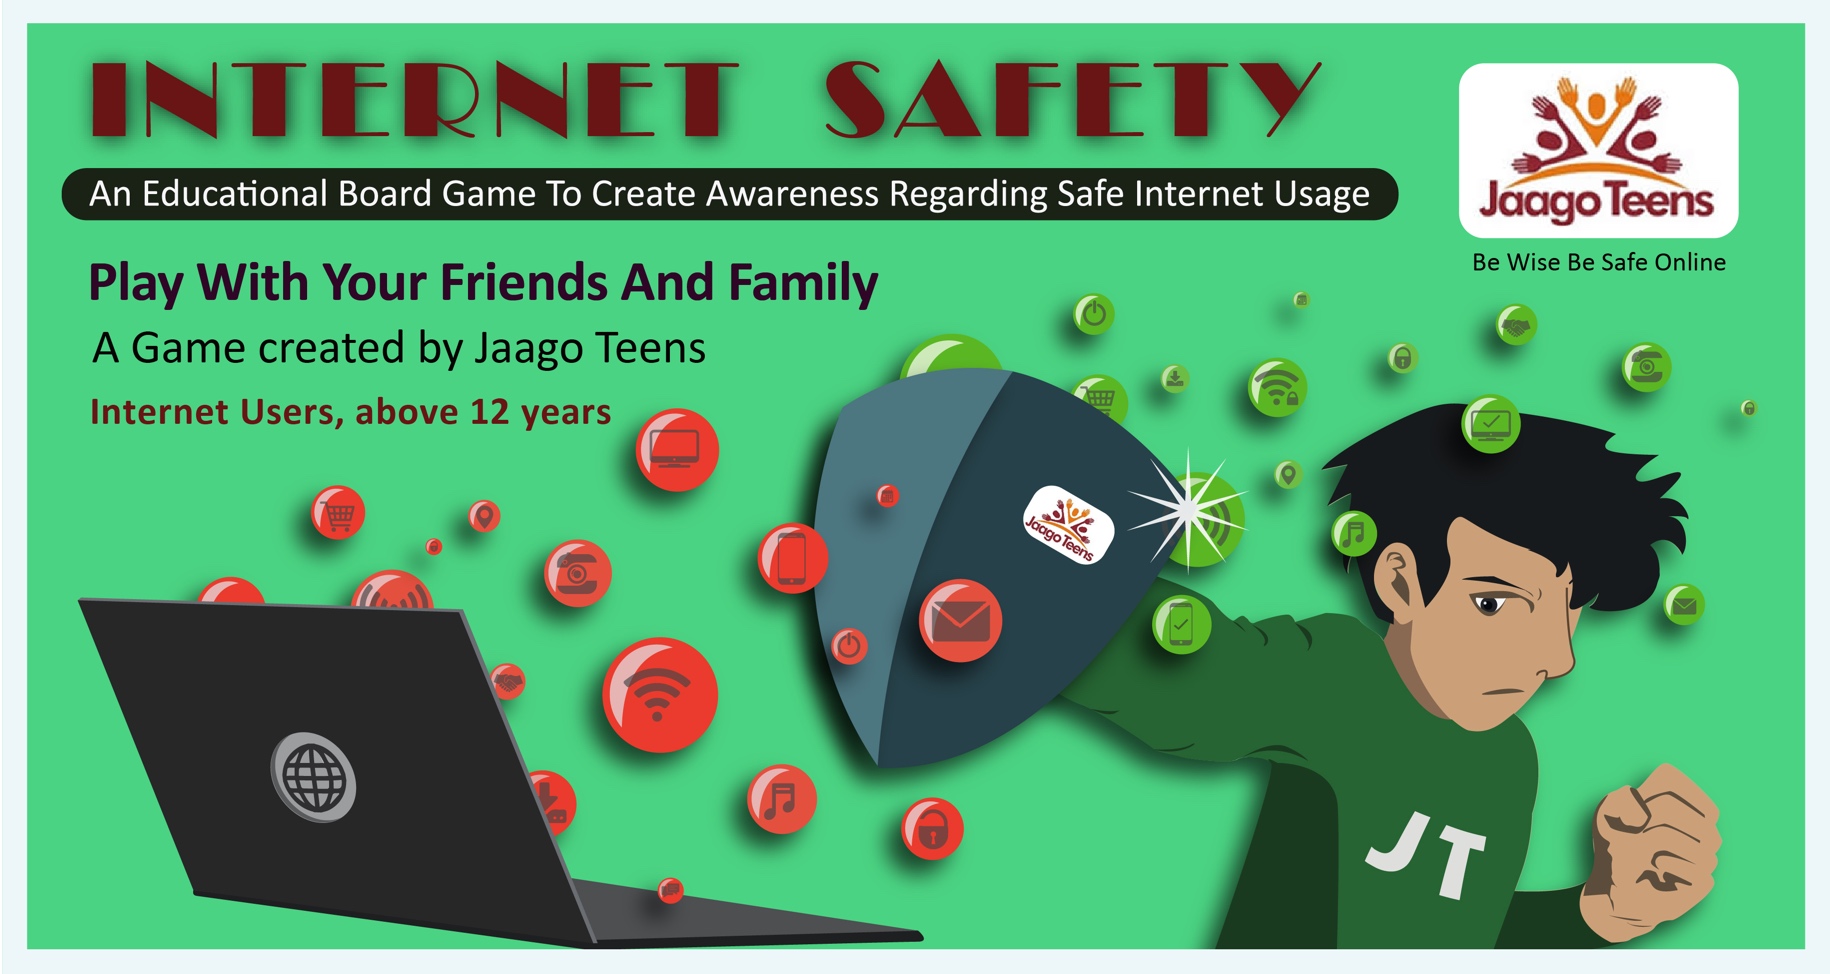 Internet Safety board game - to teach safety rules through a fun game